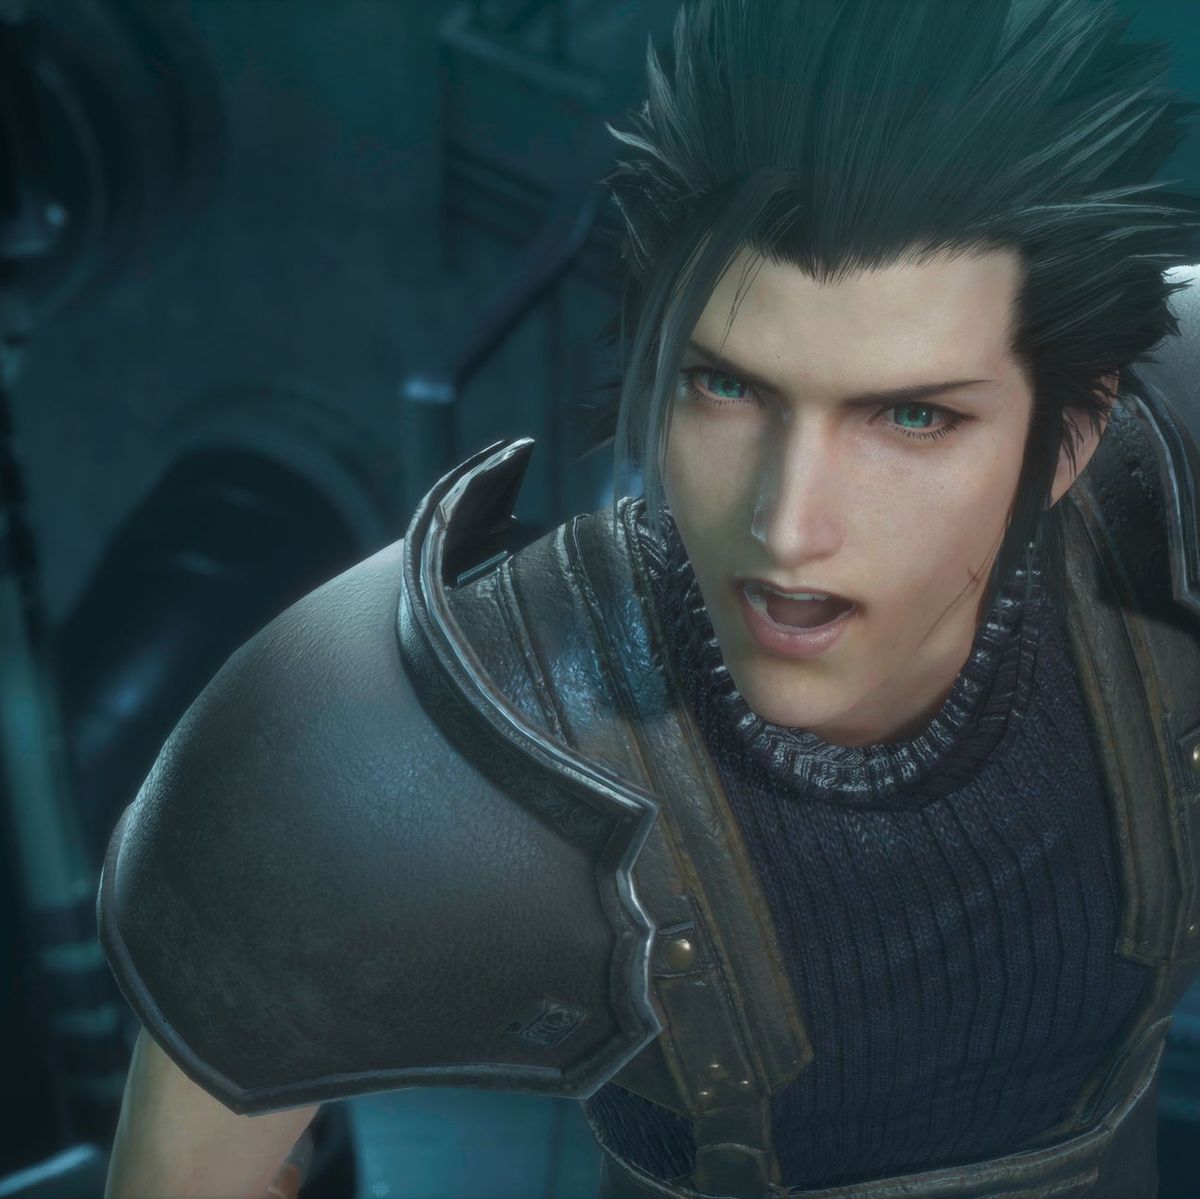 Final Fantasy VII Remake release date UPDATE - PS4 AND Xbox One